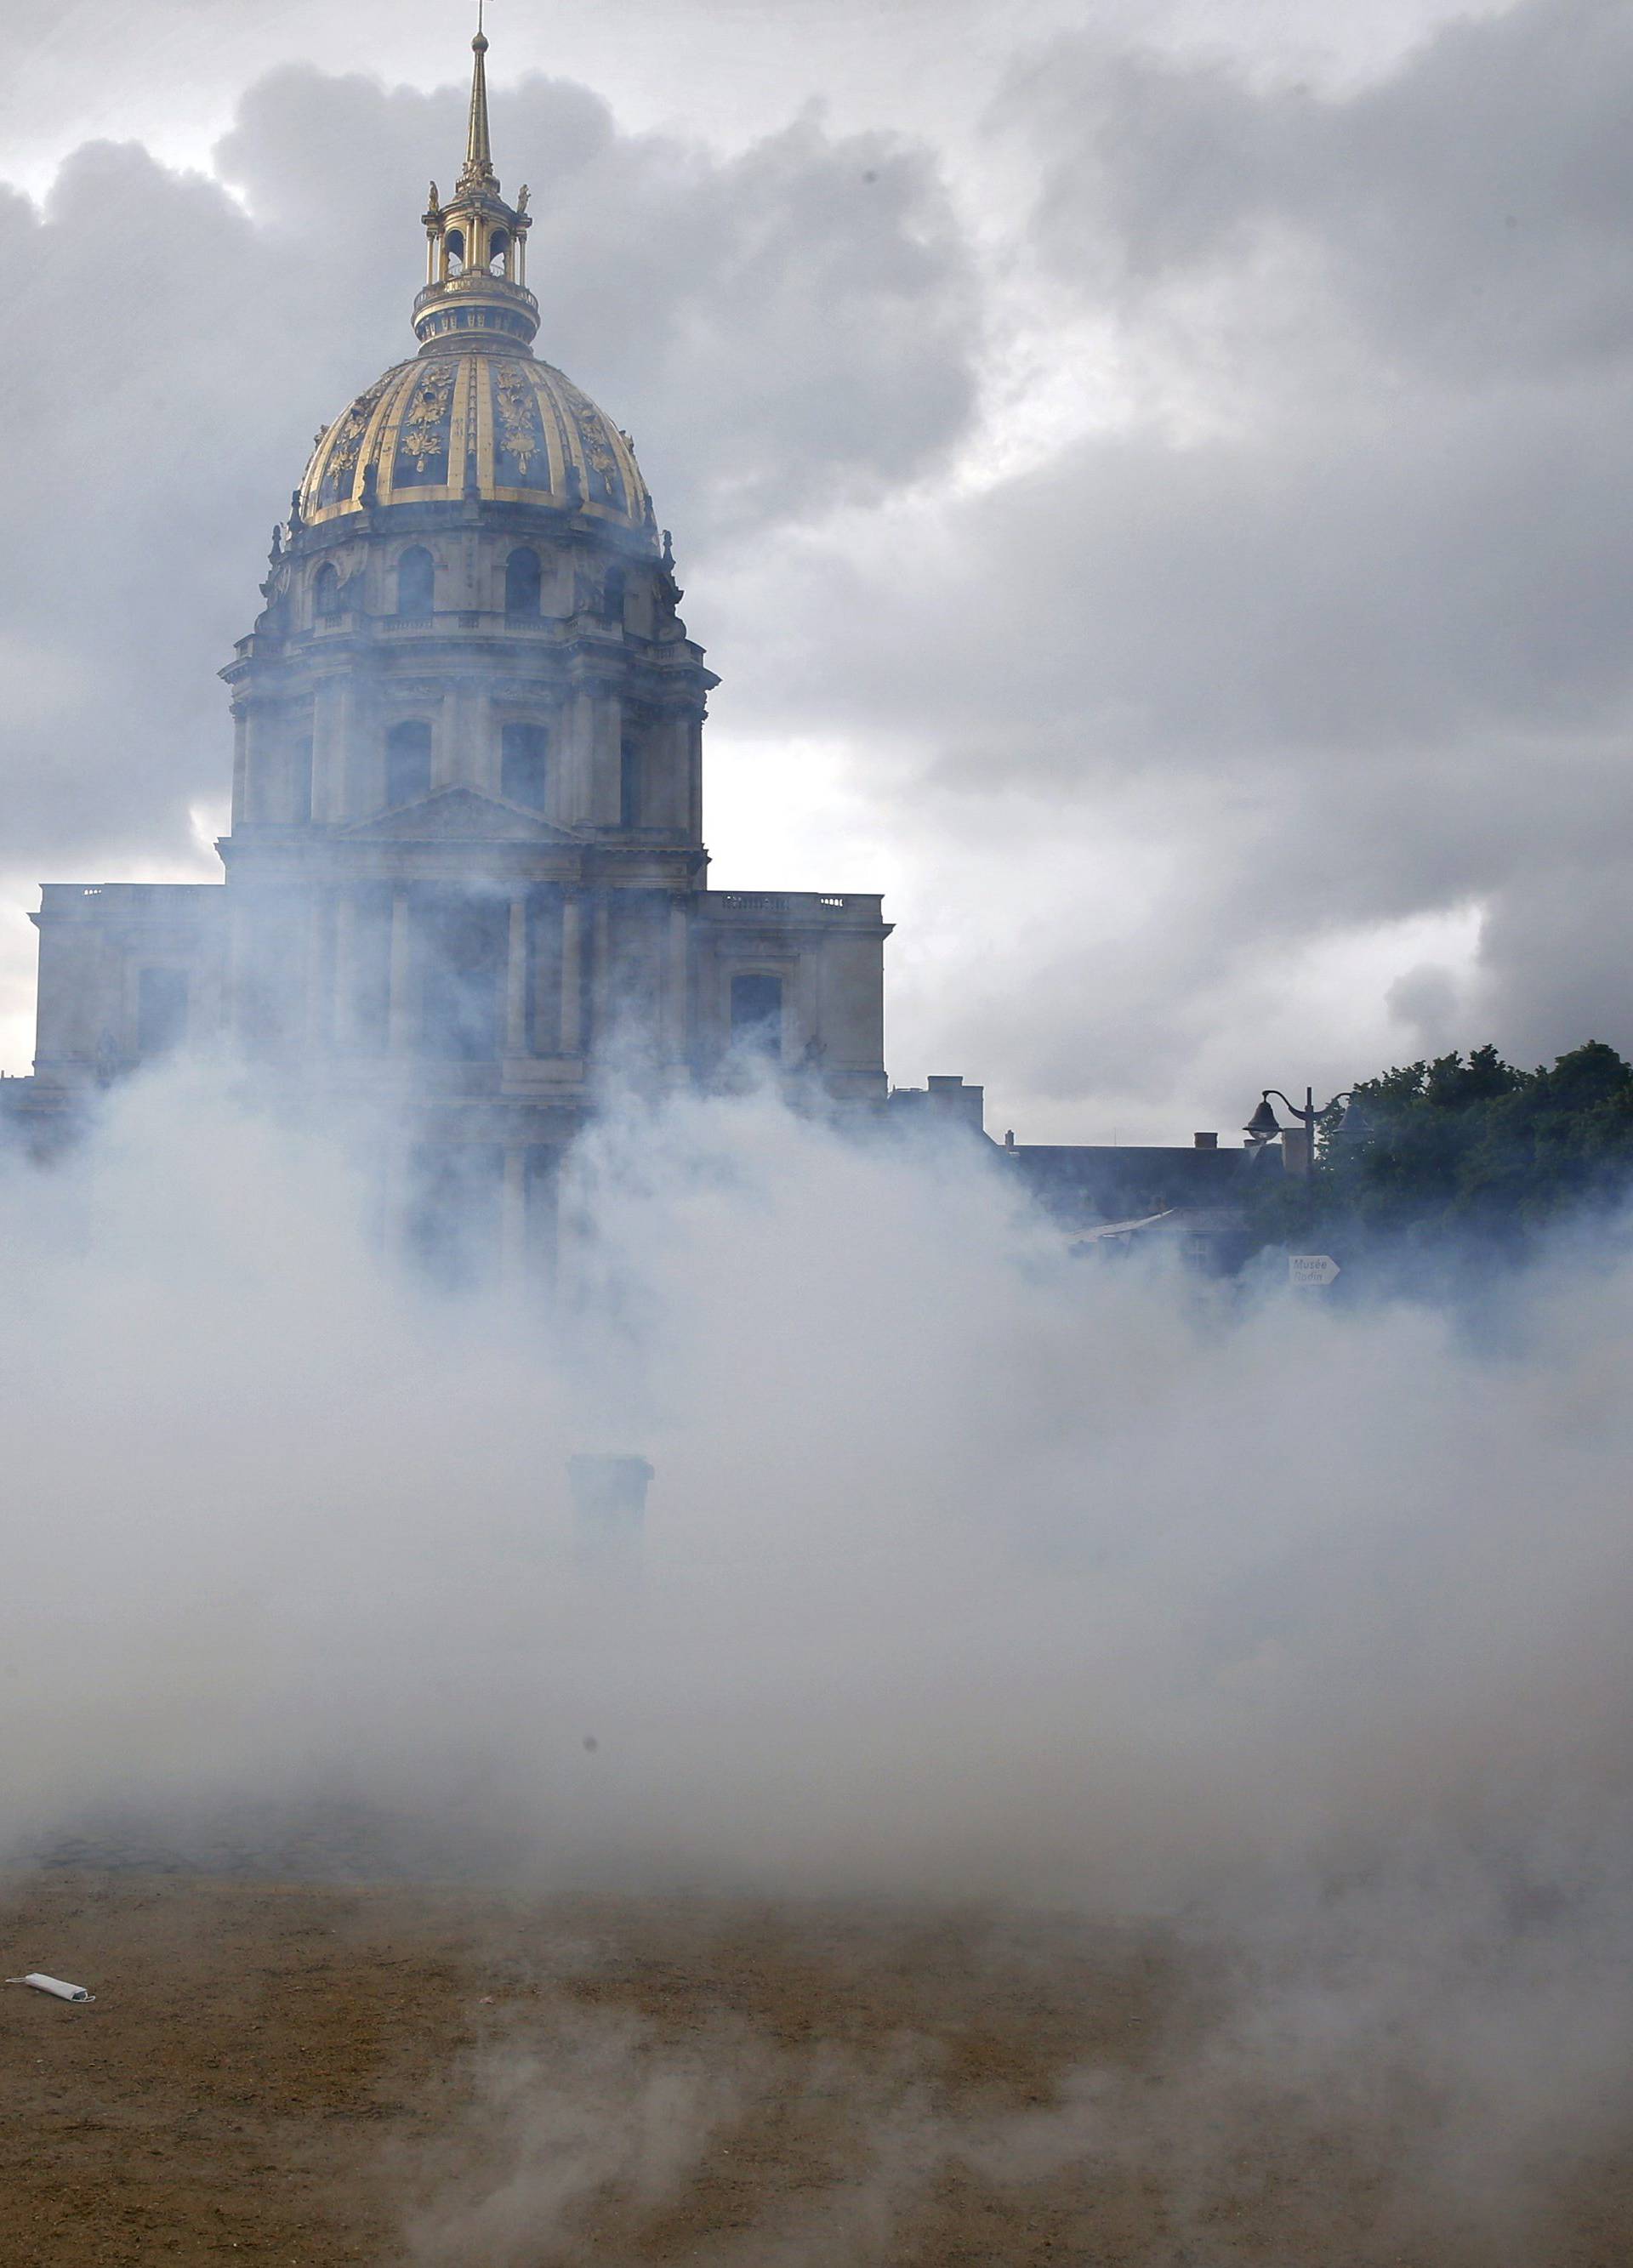 Clouds of teargas waft across the Invalides esplanade during a demonstration against French labour law reform in Paris